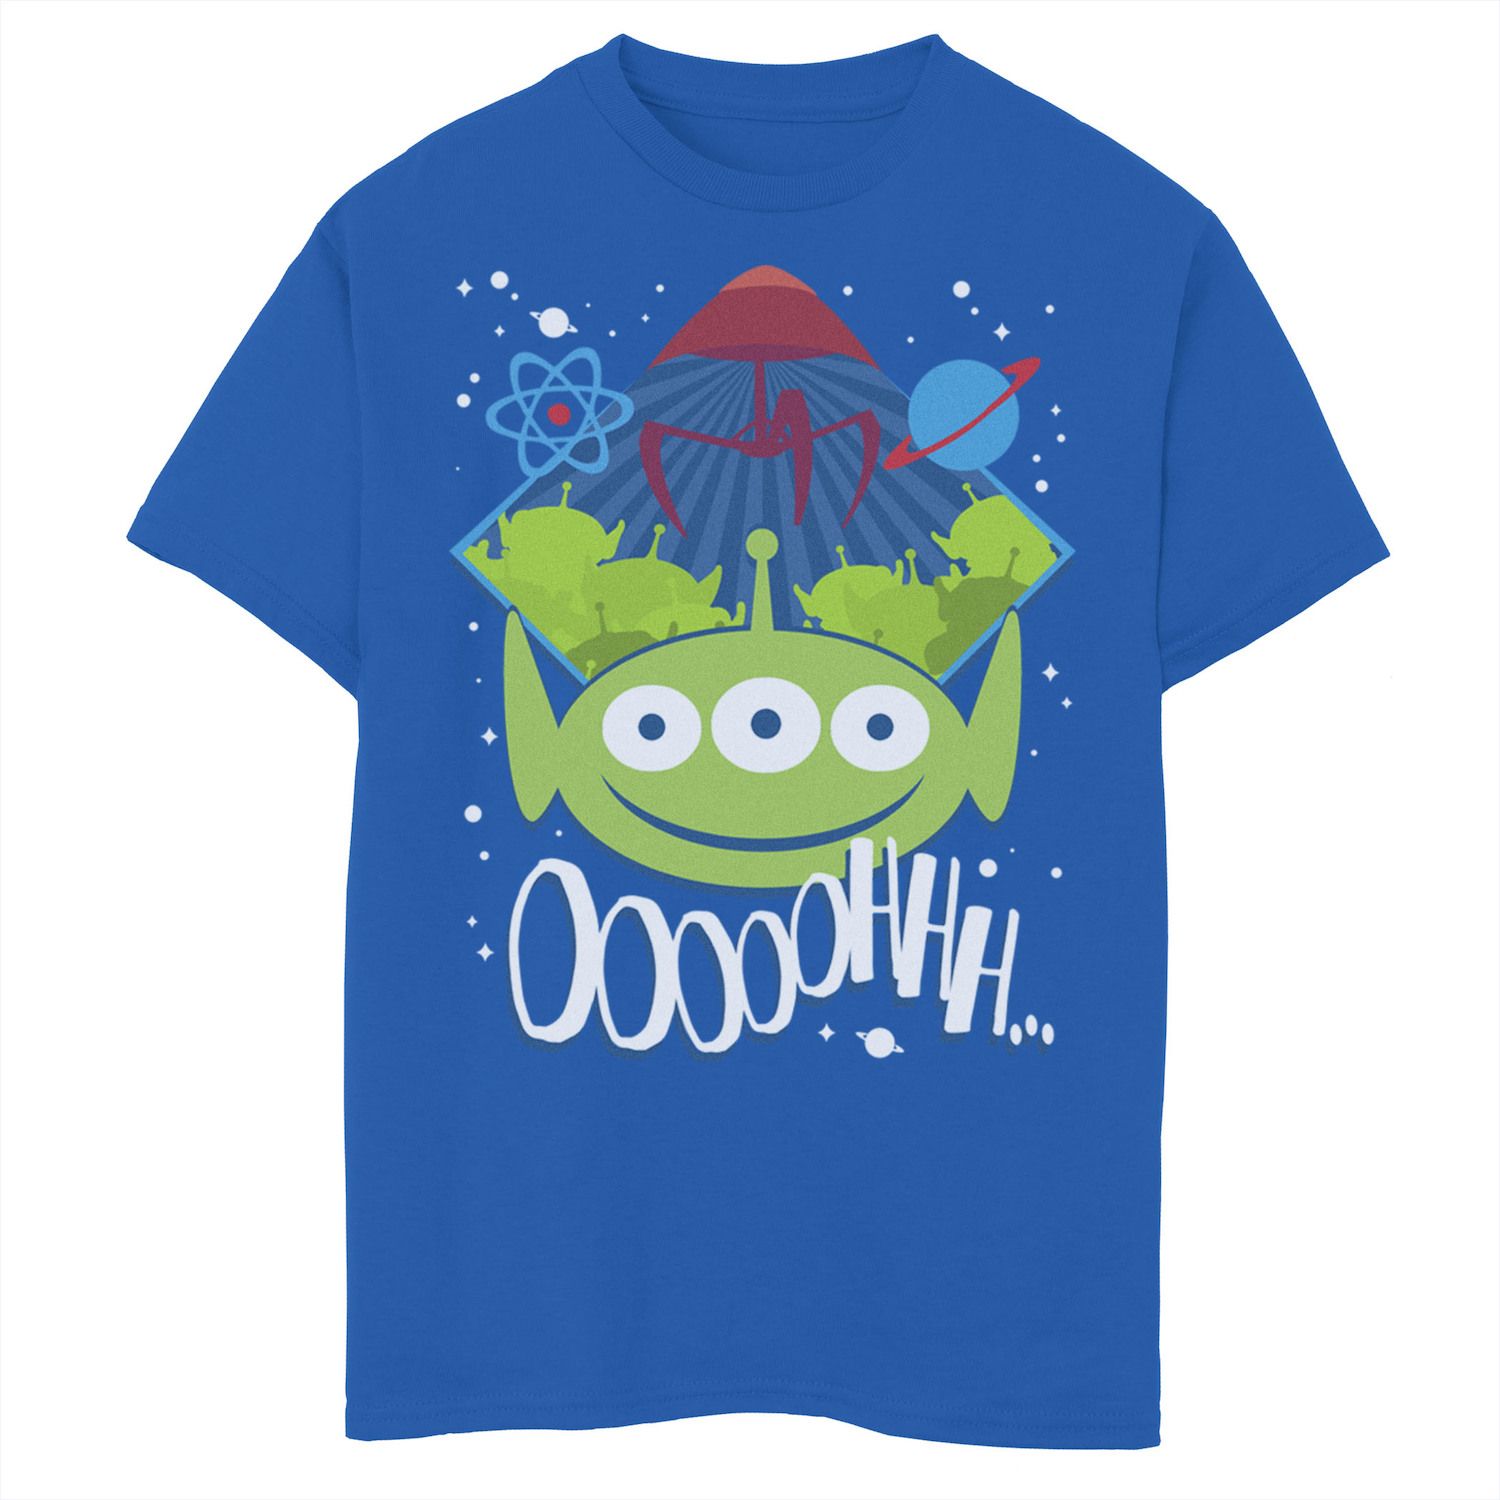 Image for Disney / Pixar 's Toy Story Boys 8-20 Aliens Cartoon Style Graphic Tee at Kohl's.